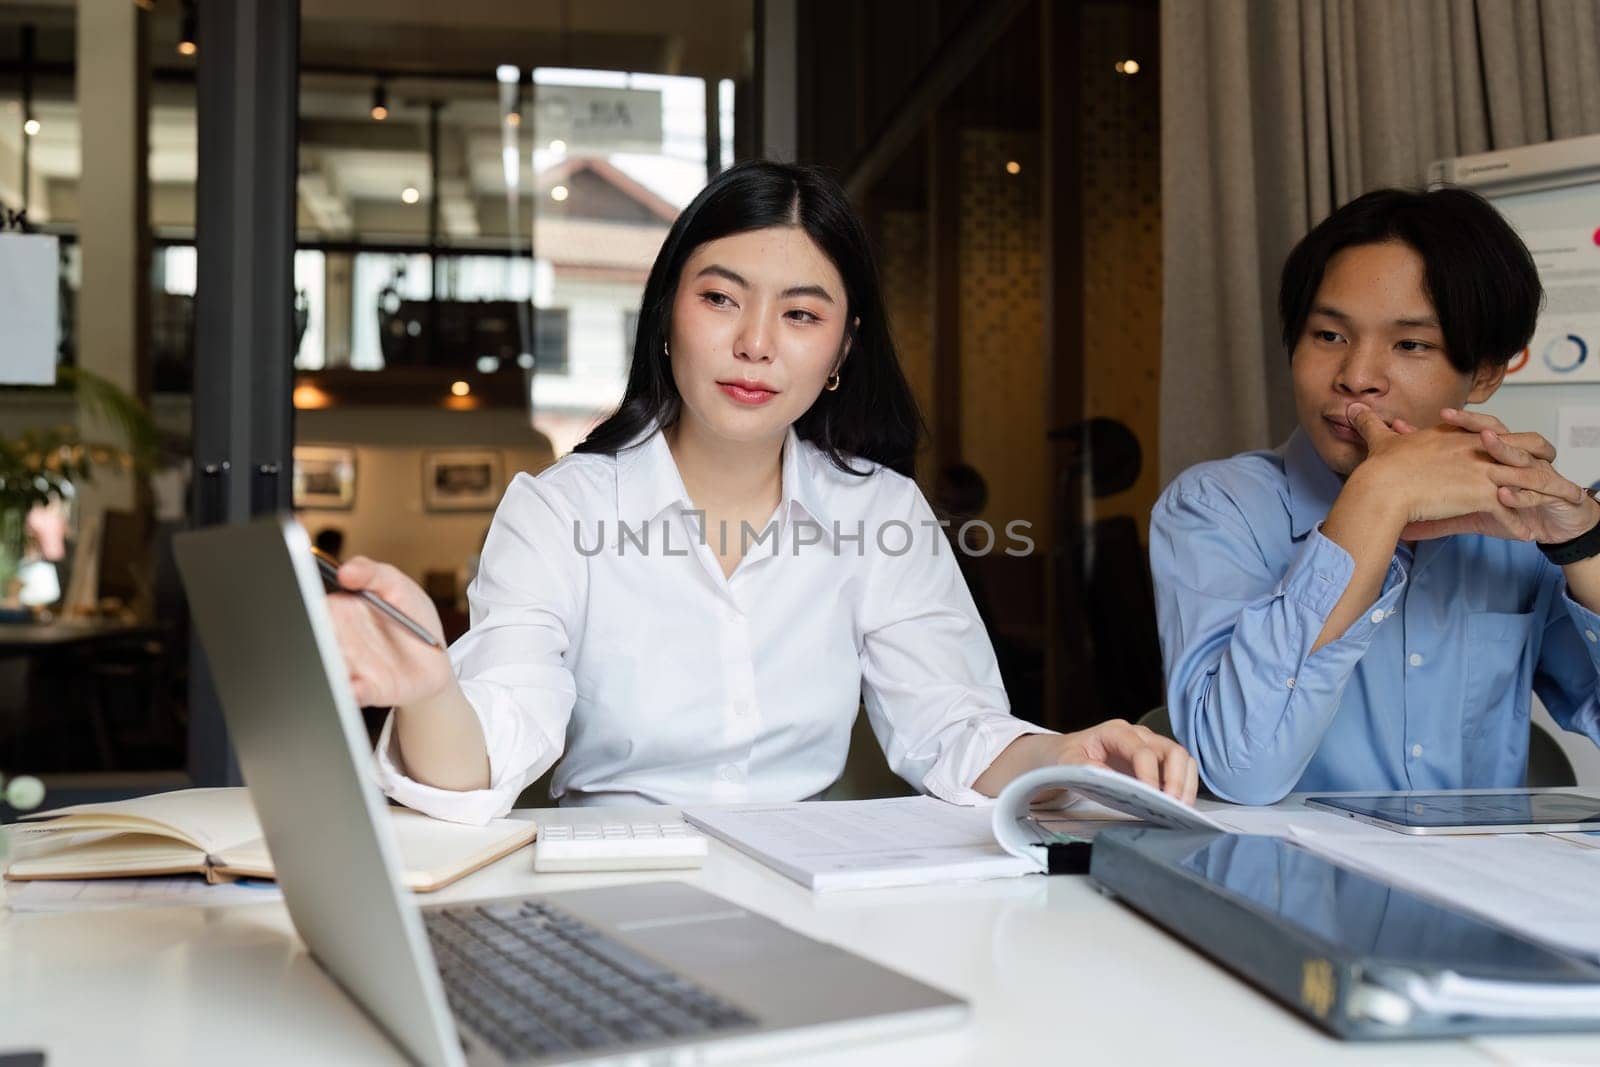 businesswoman having a discussion with her colleagues in a boardroom. Group of happy businesspeople sharing ideas during a meeting.